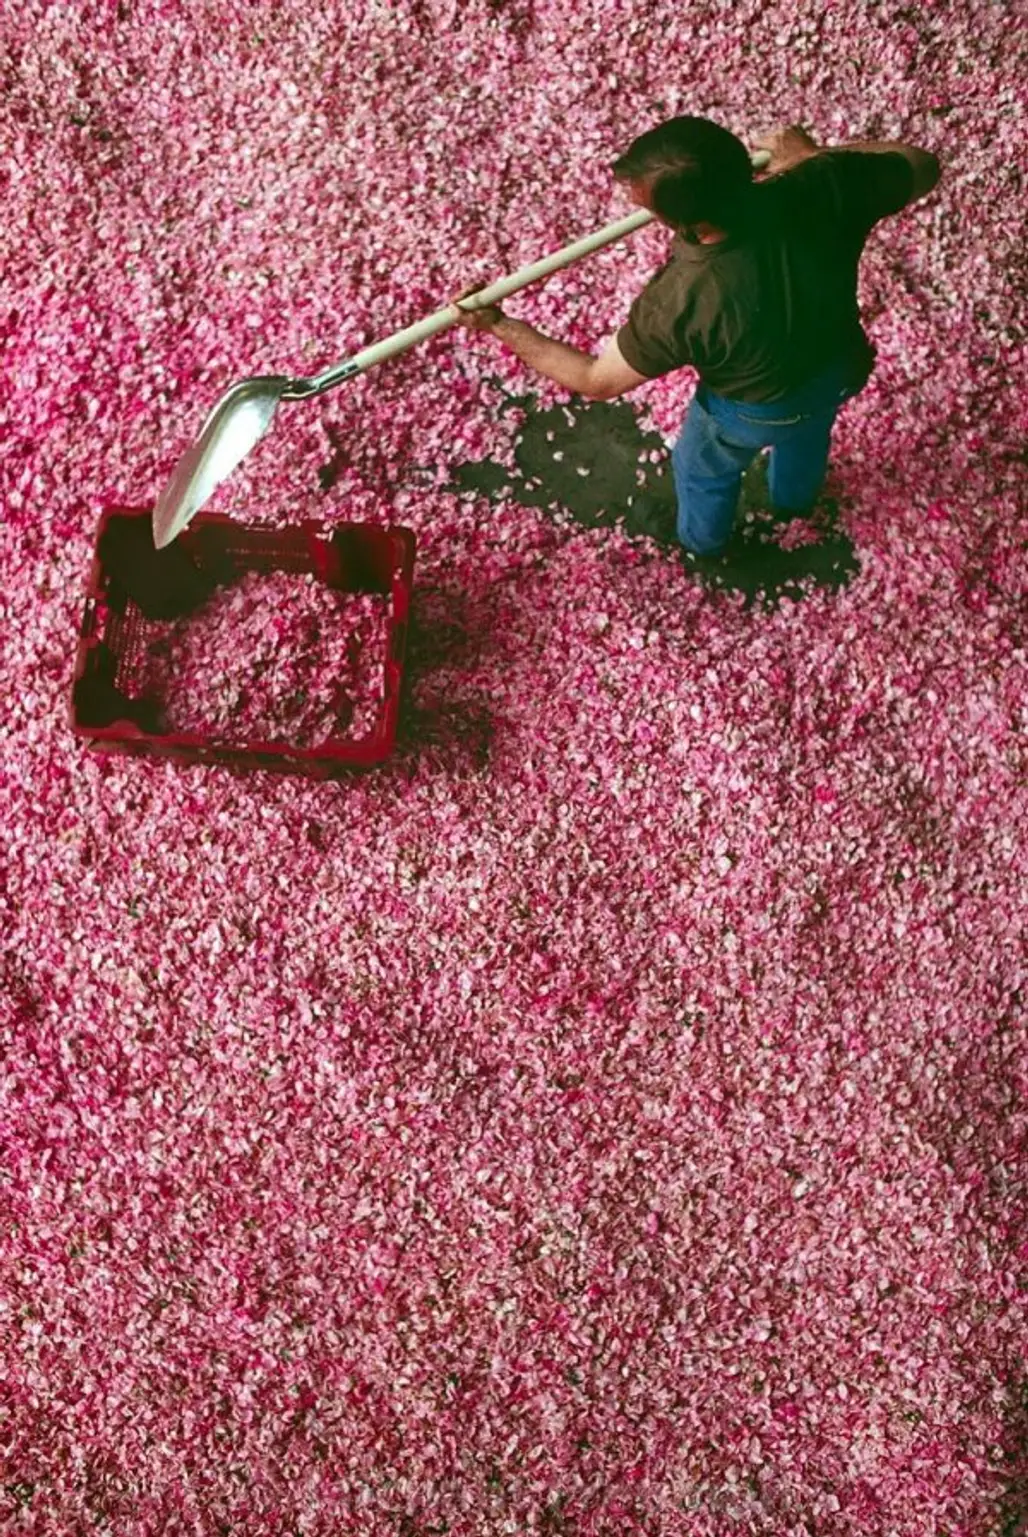 See the Workers Drying Petals for Perfume